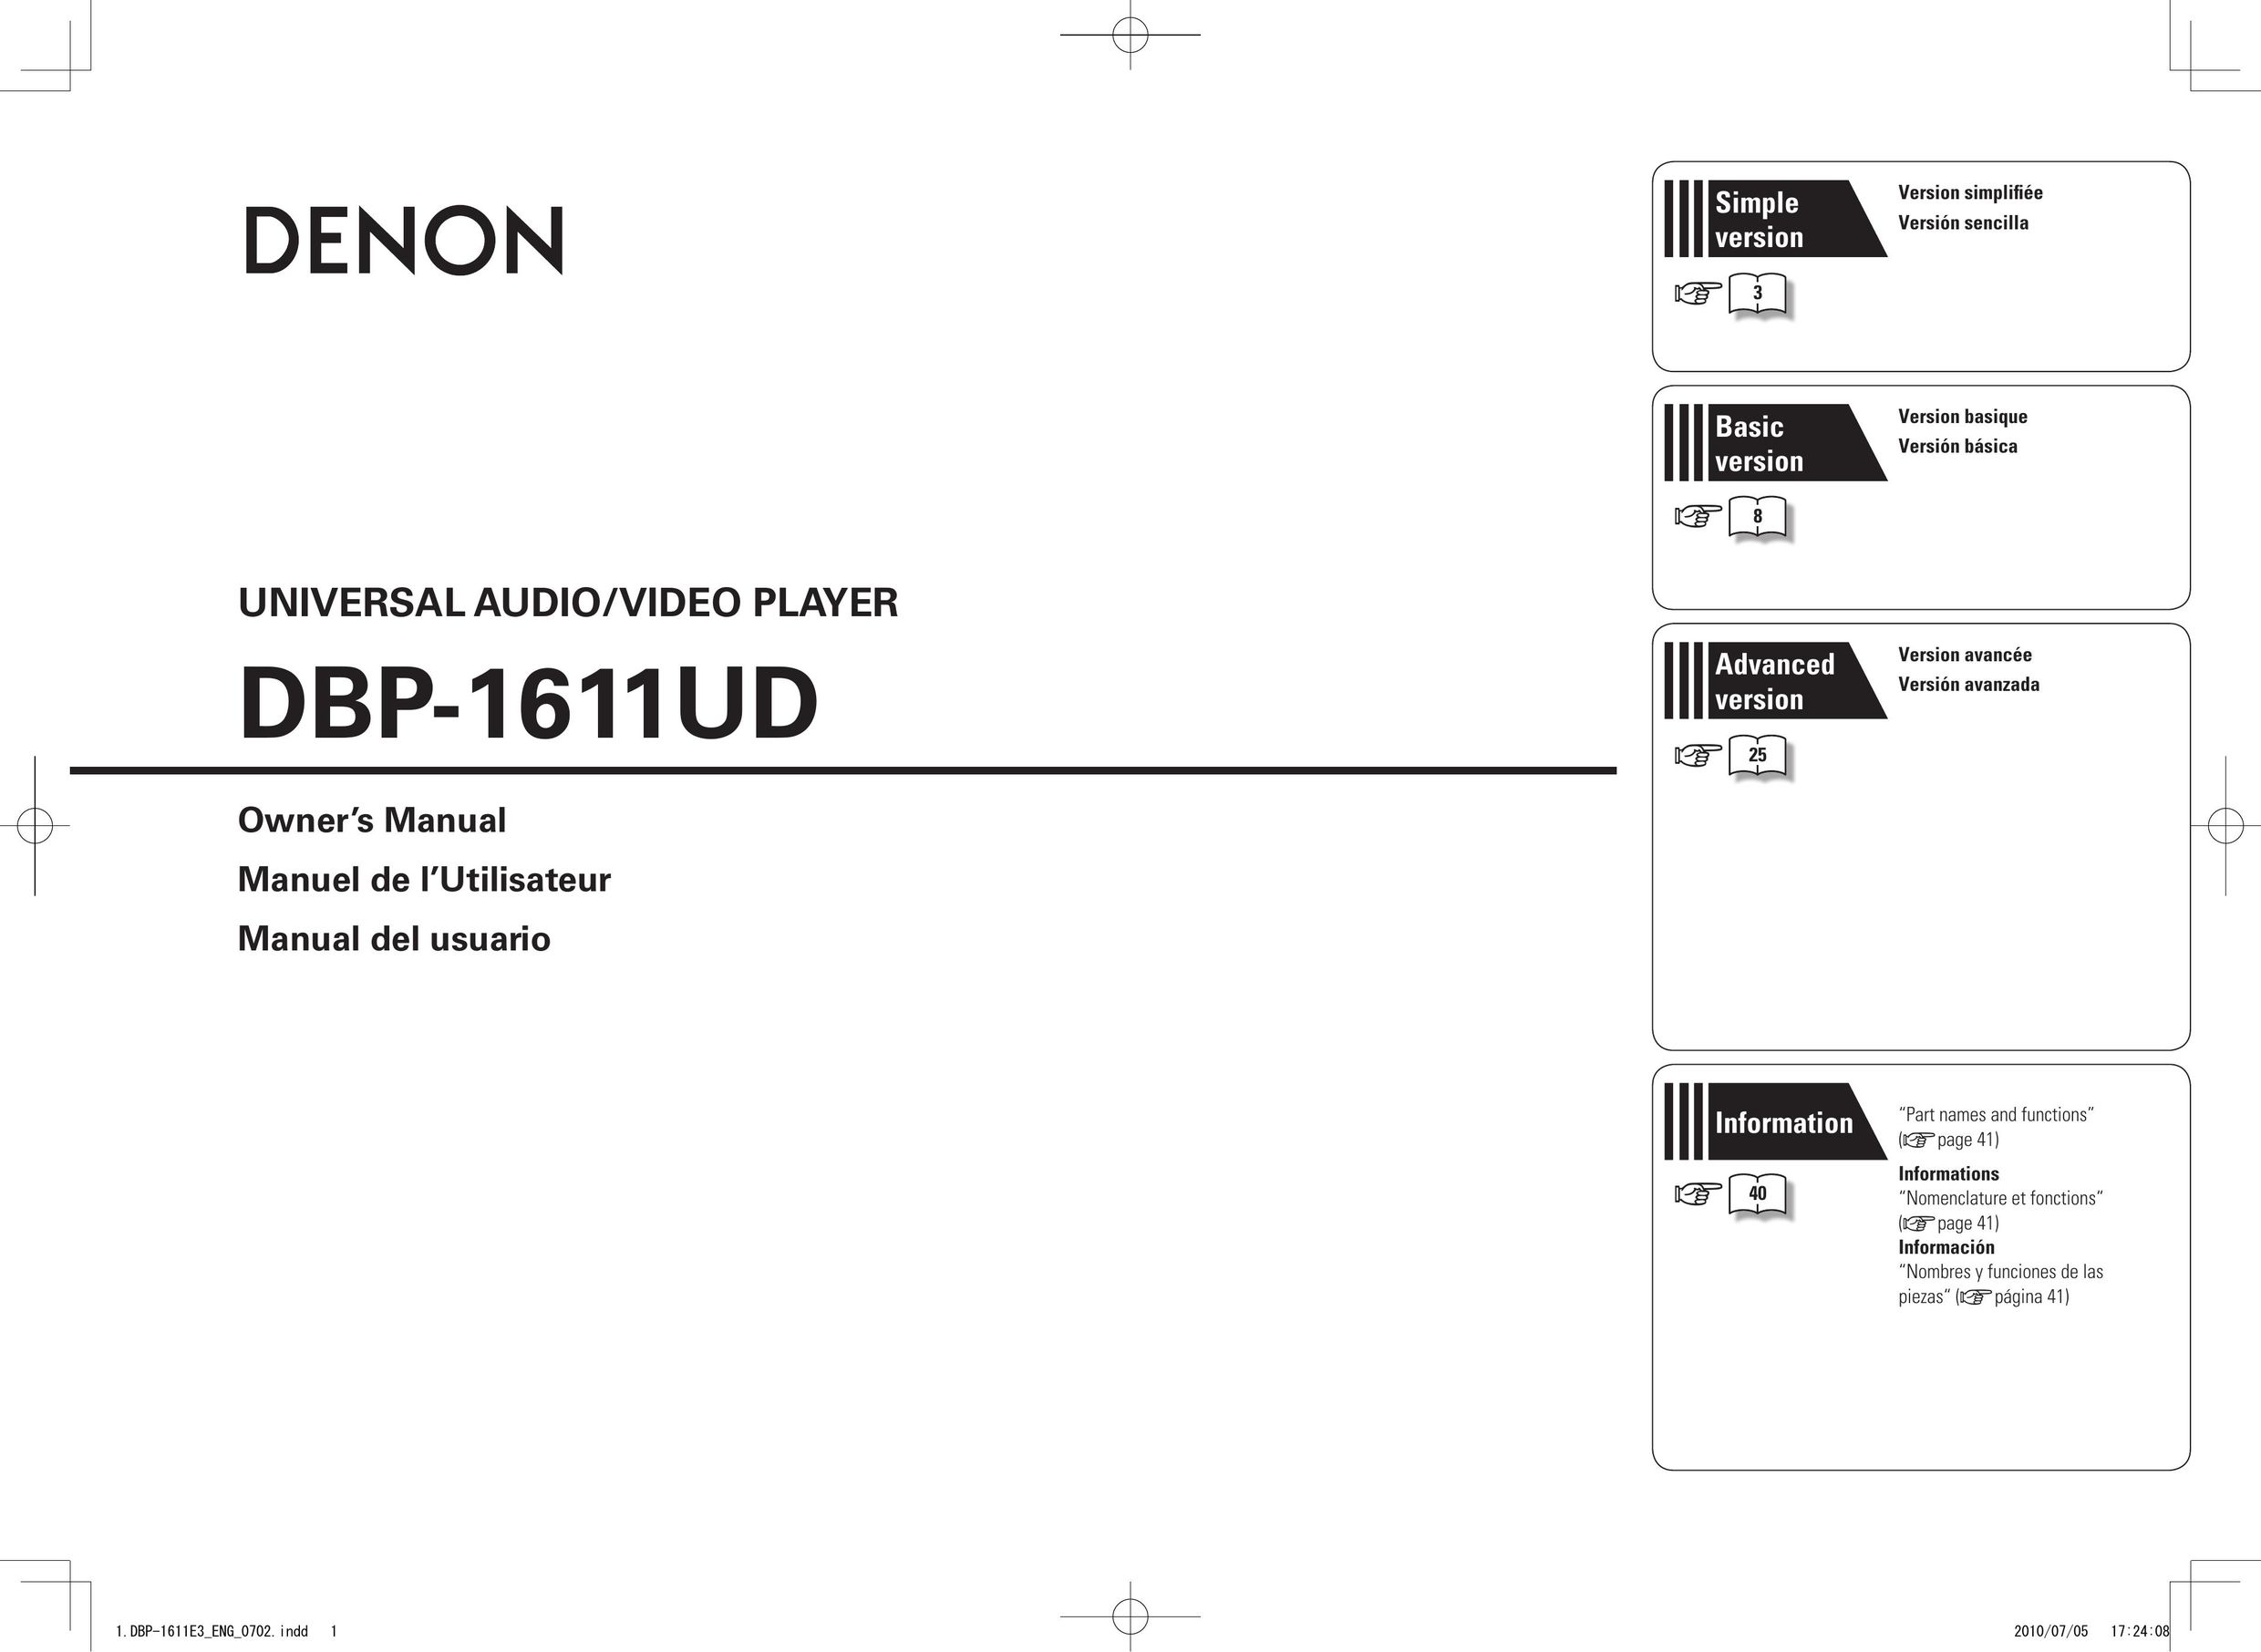 Denon DBP-1611UD Car Stereo System User Manual